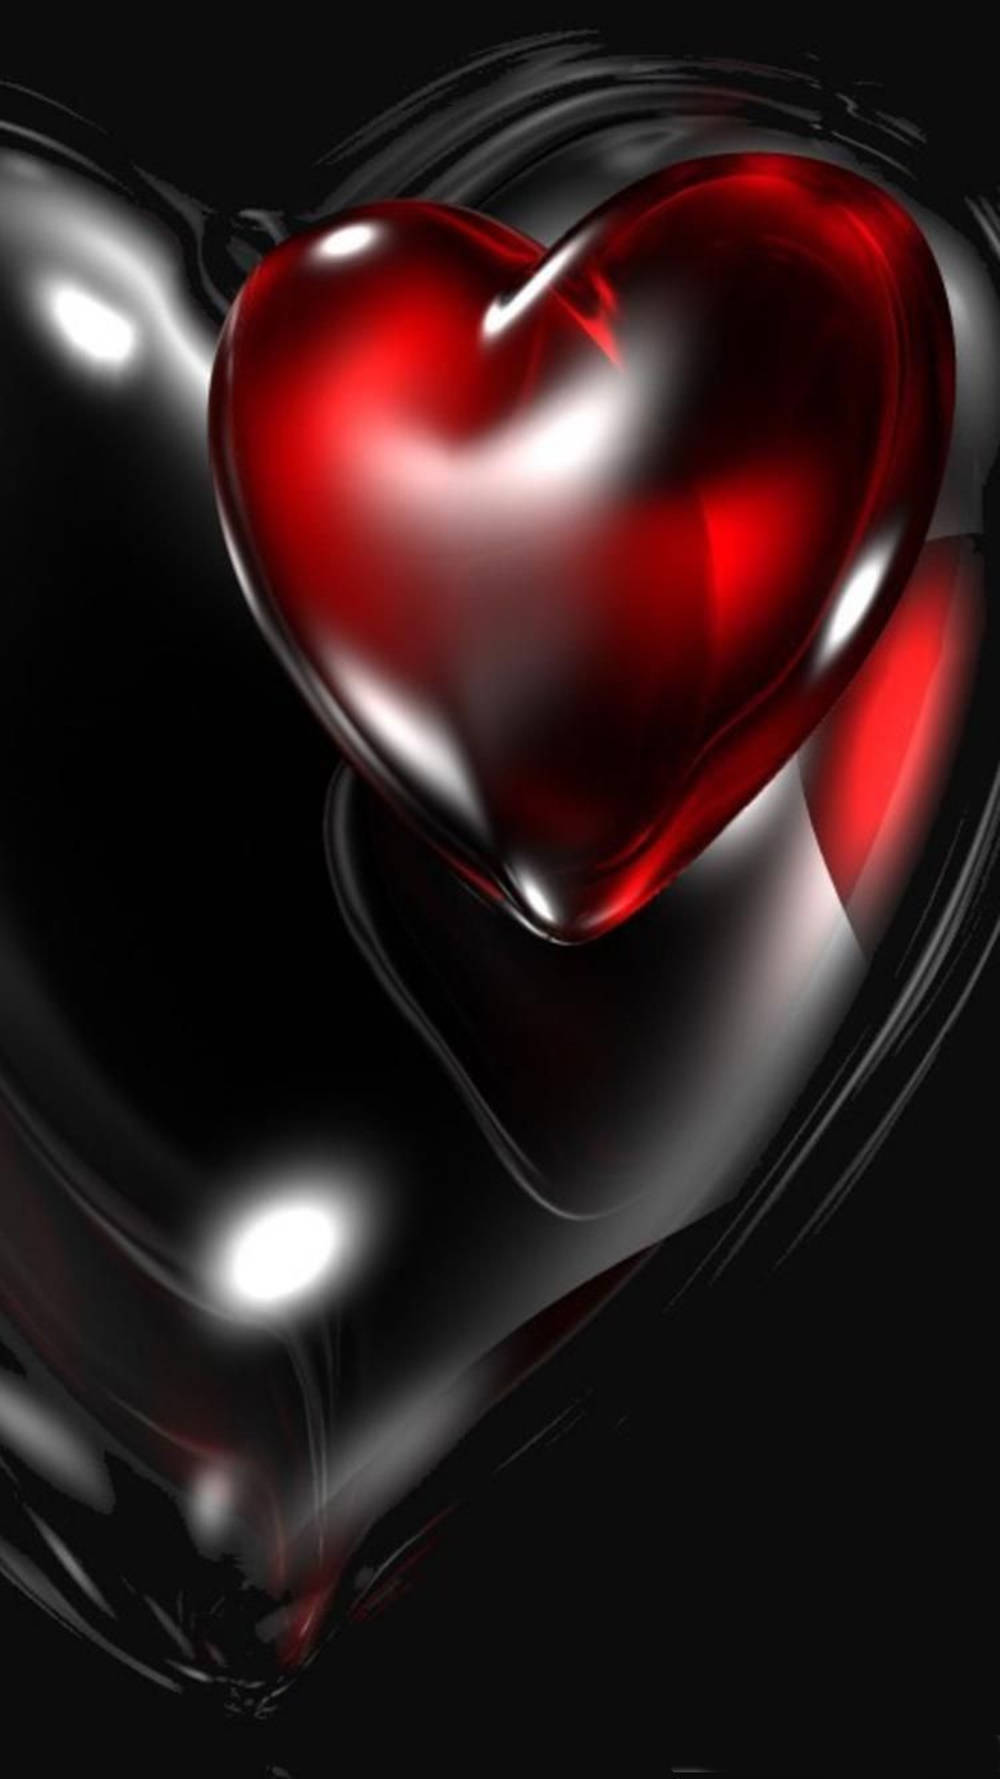 Glossy Picture For Heart Iphone Screen Wallpaper